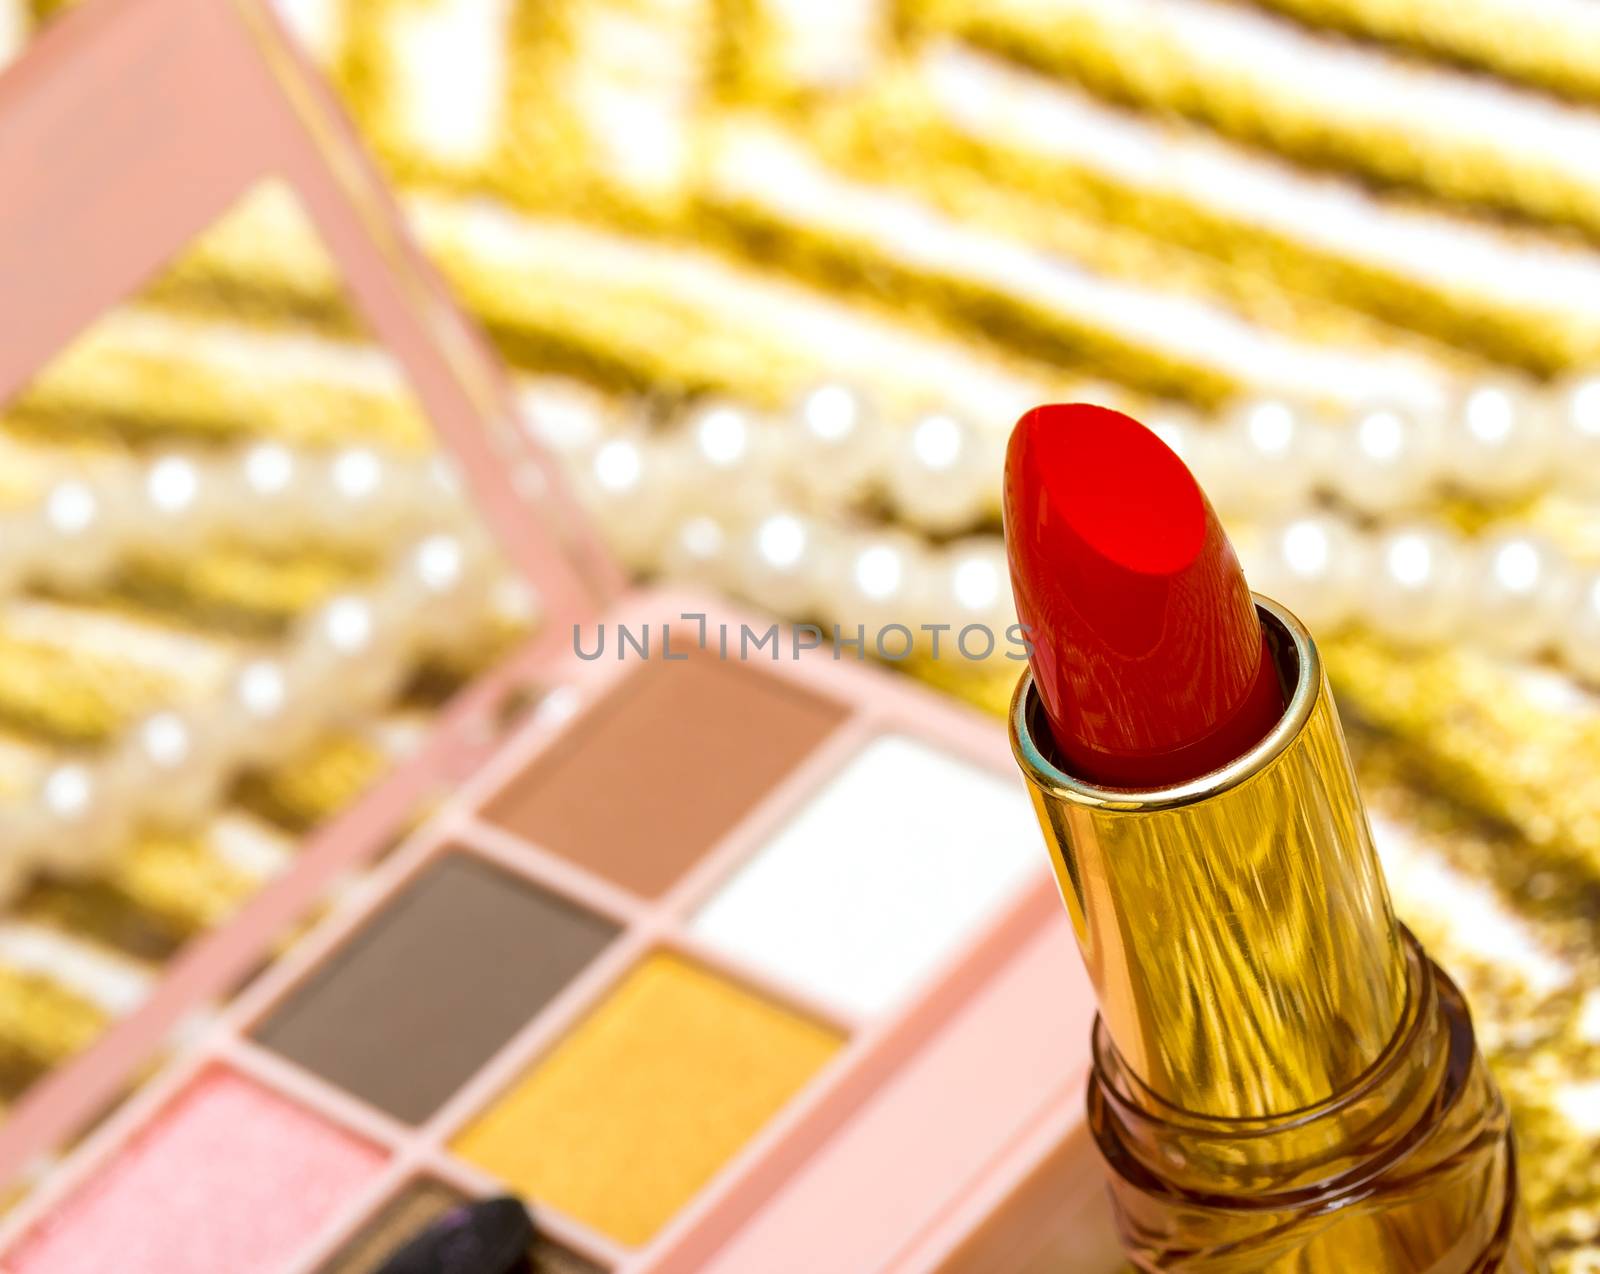 Red Lipstick Makeup Showing Beauty Products And Make-Up